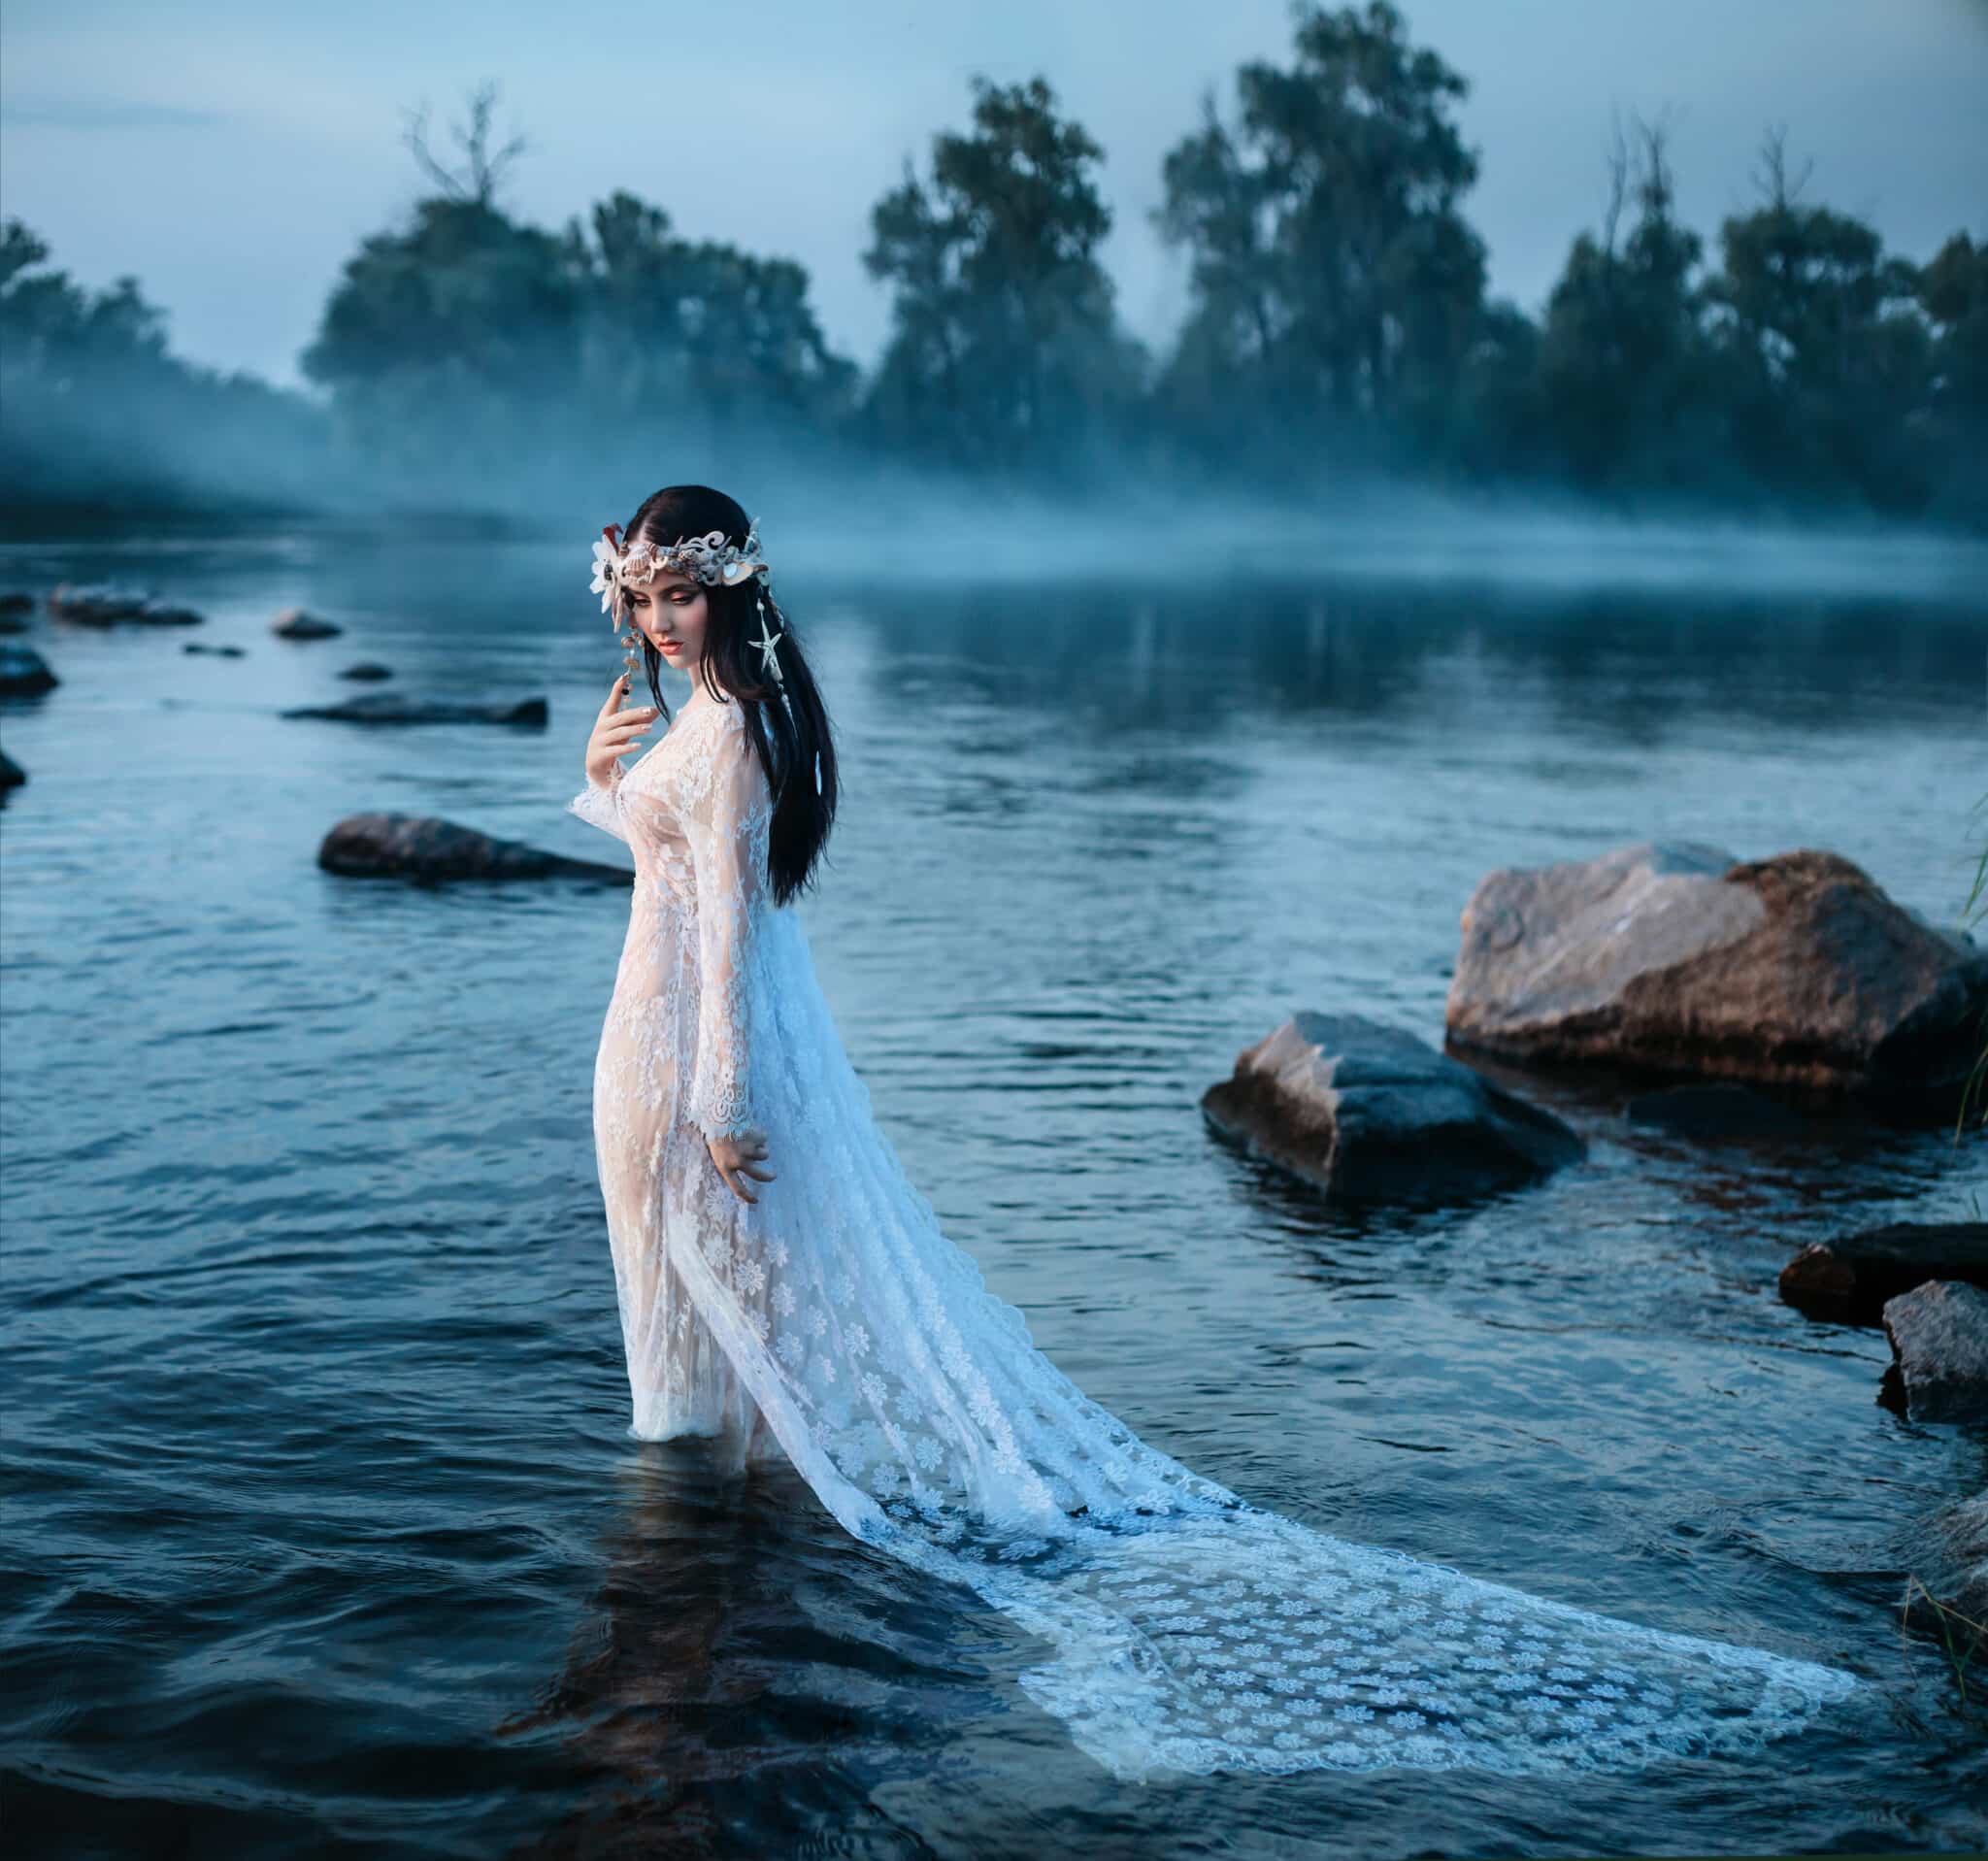 Luxurious lady, in elegant long dress in middle of lake